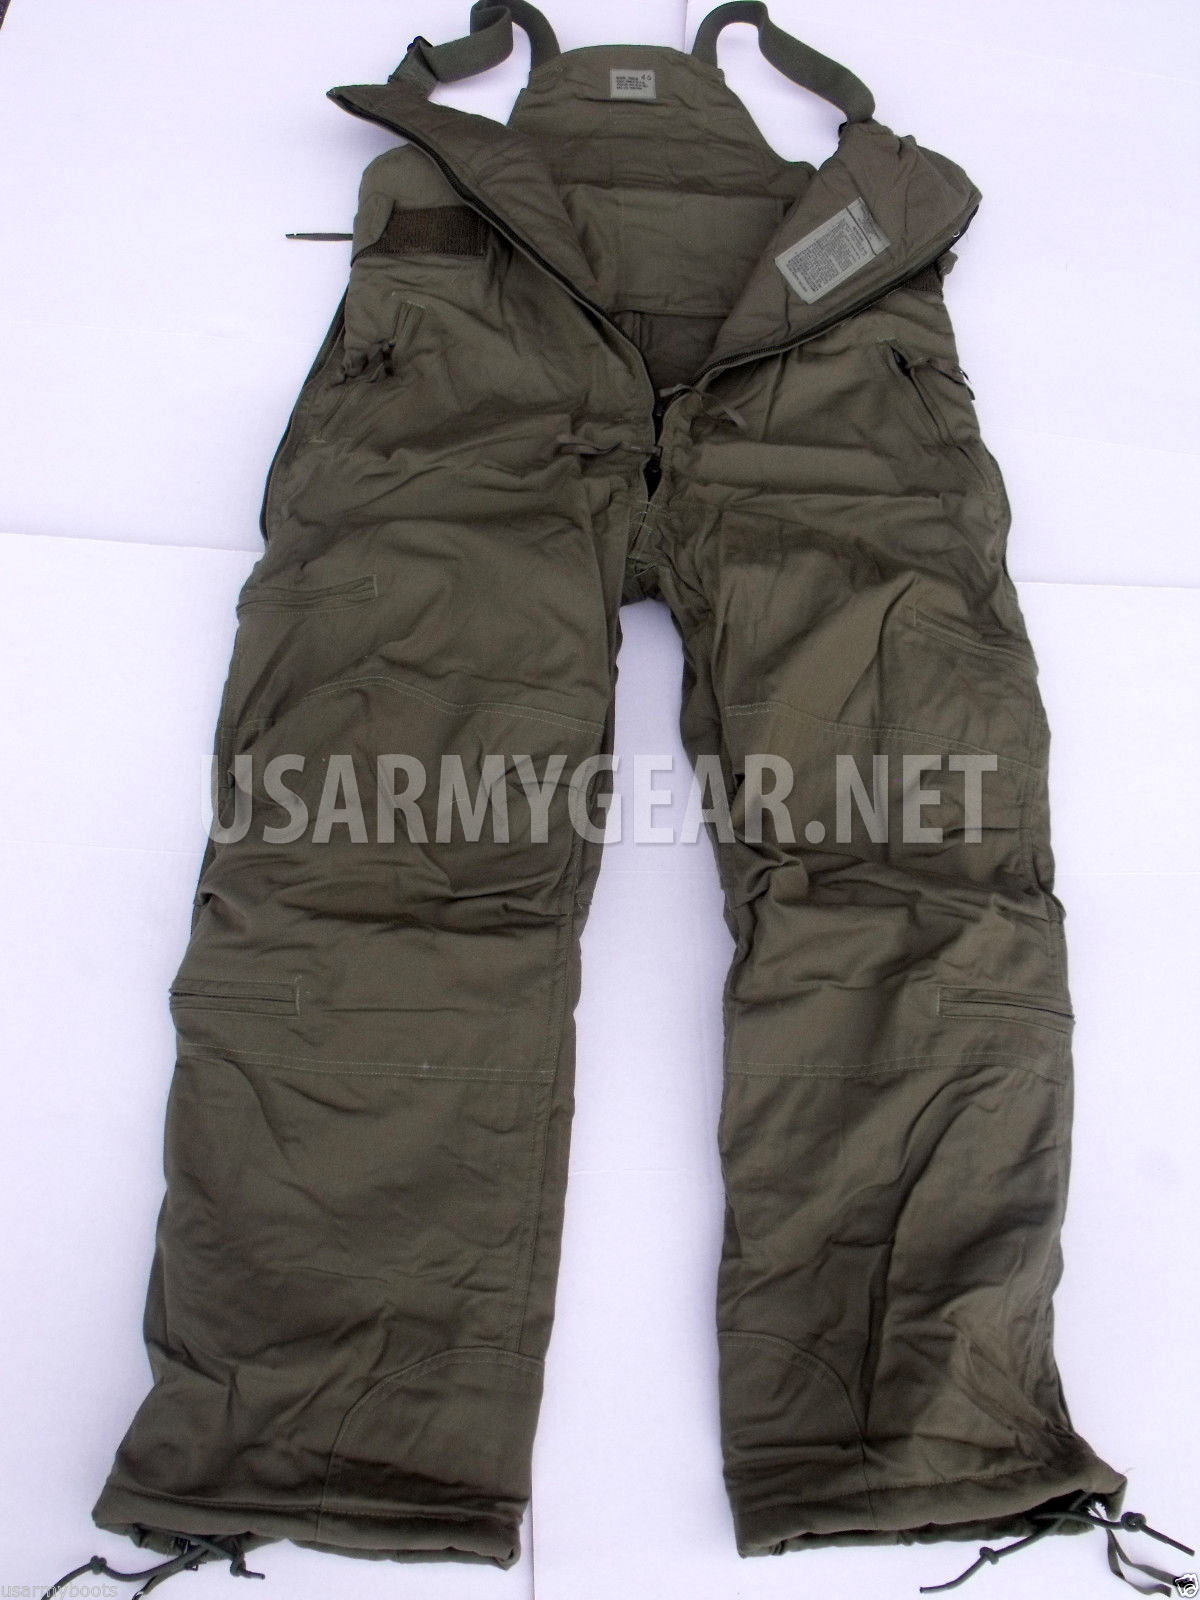 US Army Marine ECW Extreme Cold Weather High Quality Combat V. Pants Overall Bib